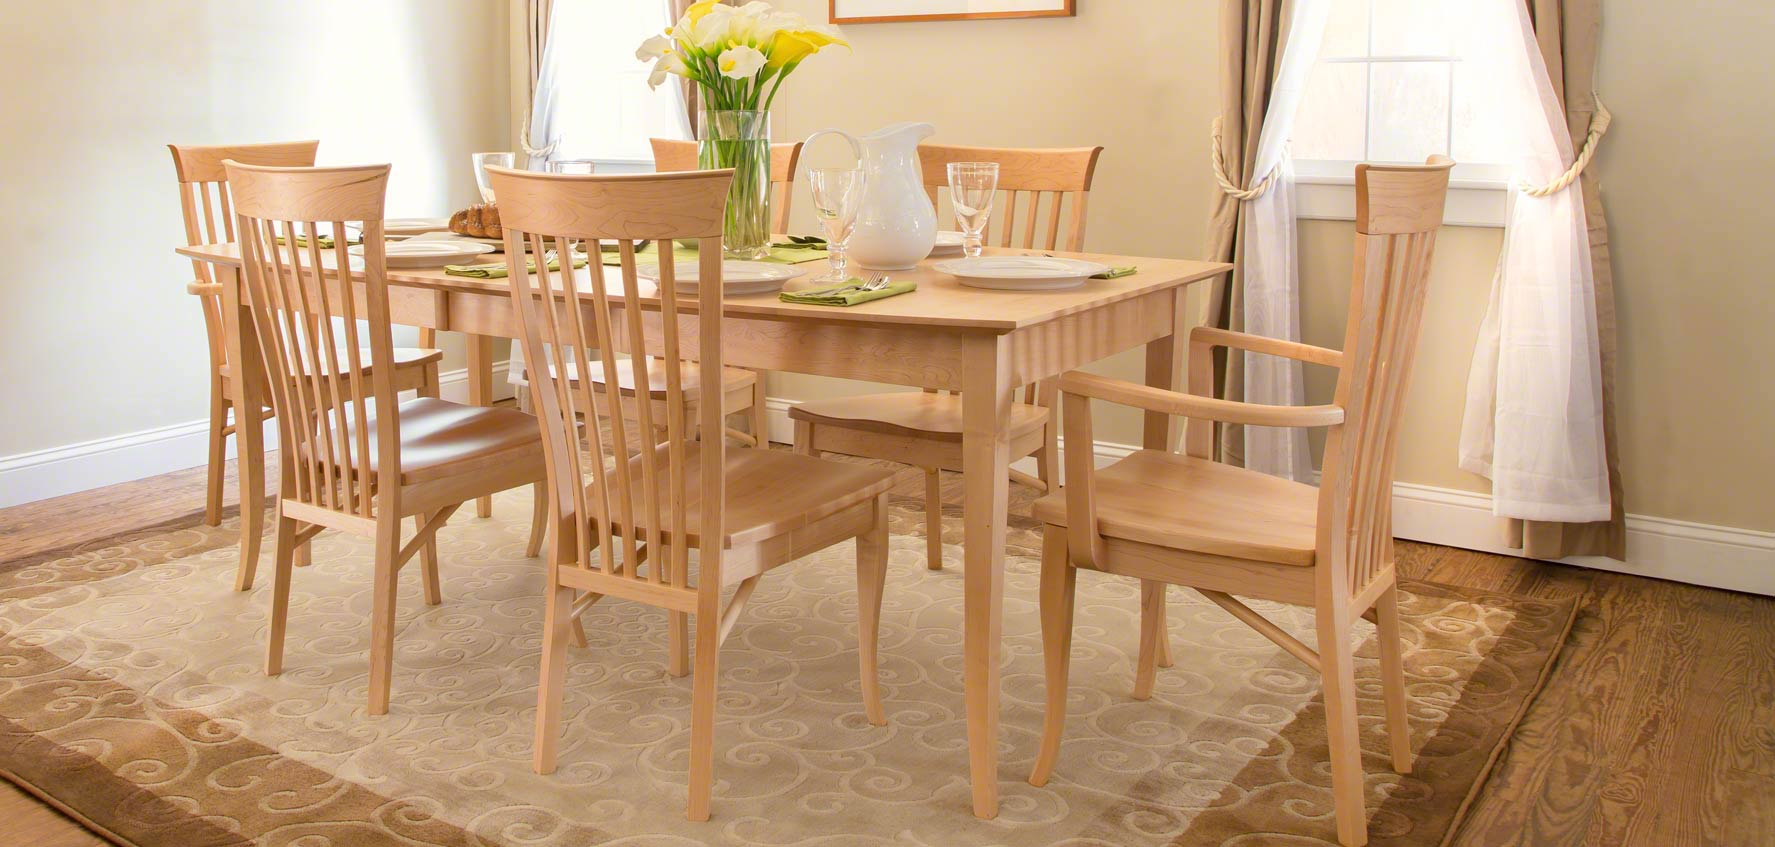 Maple Dining Table | Photo from vermontwoodstudios.com